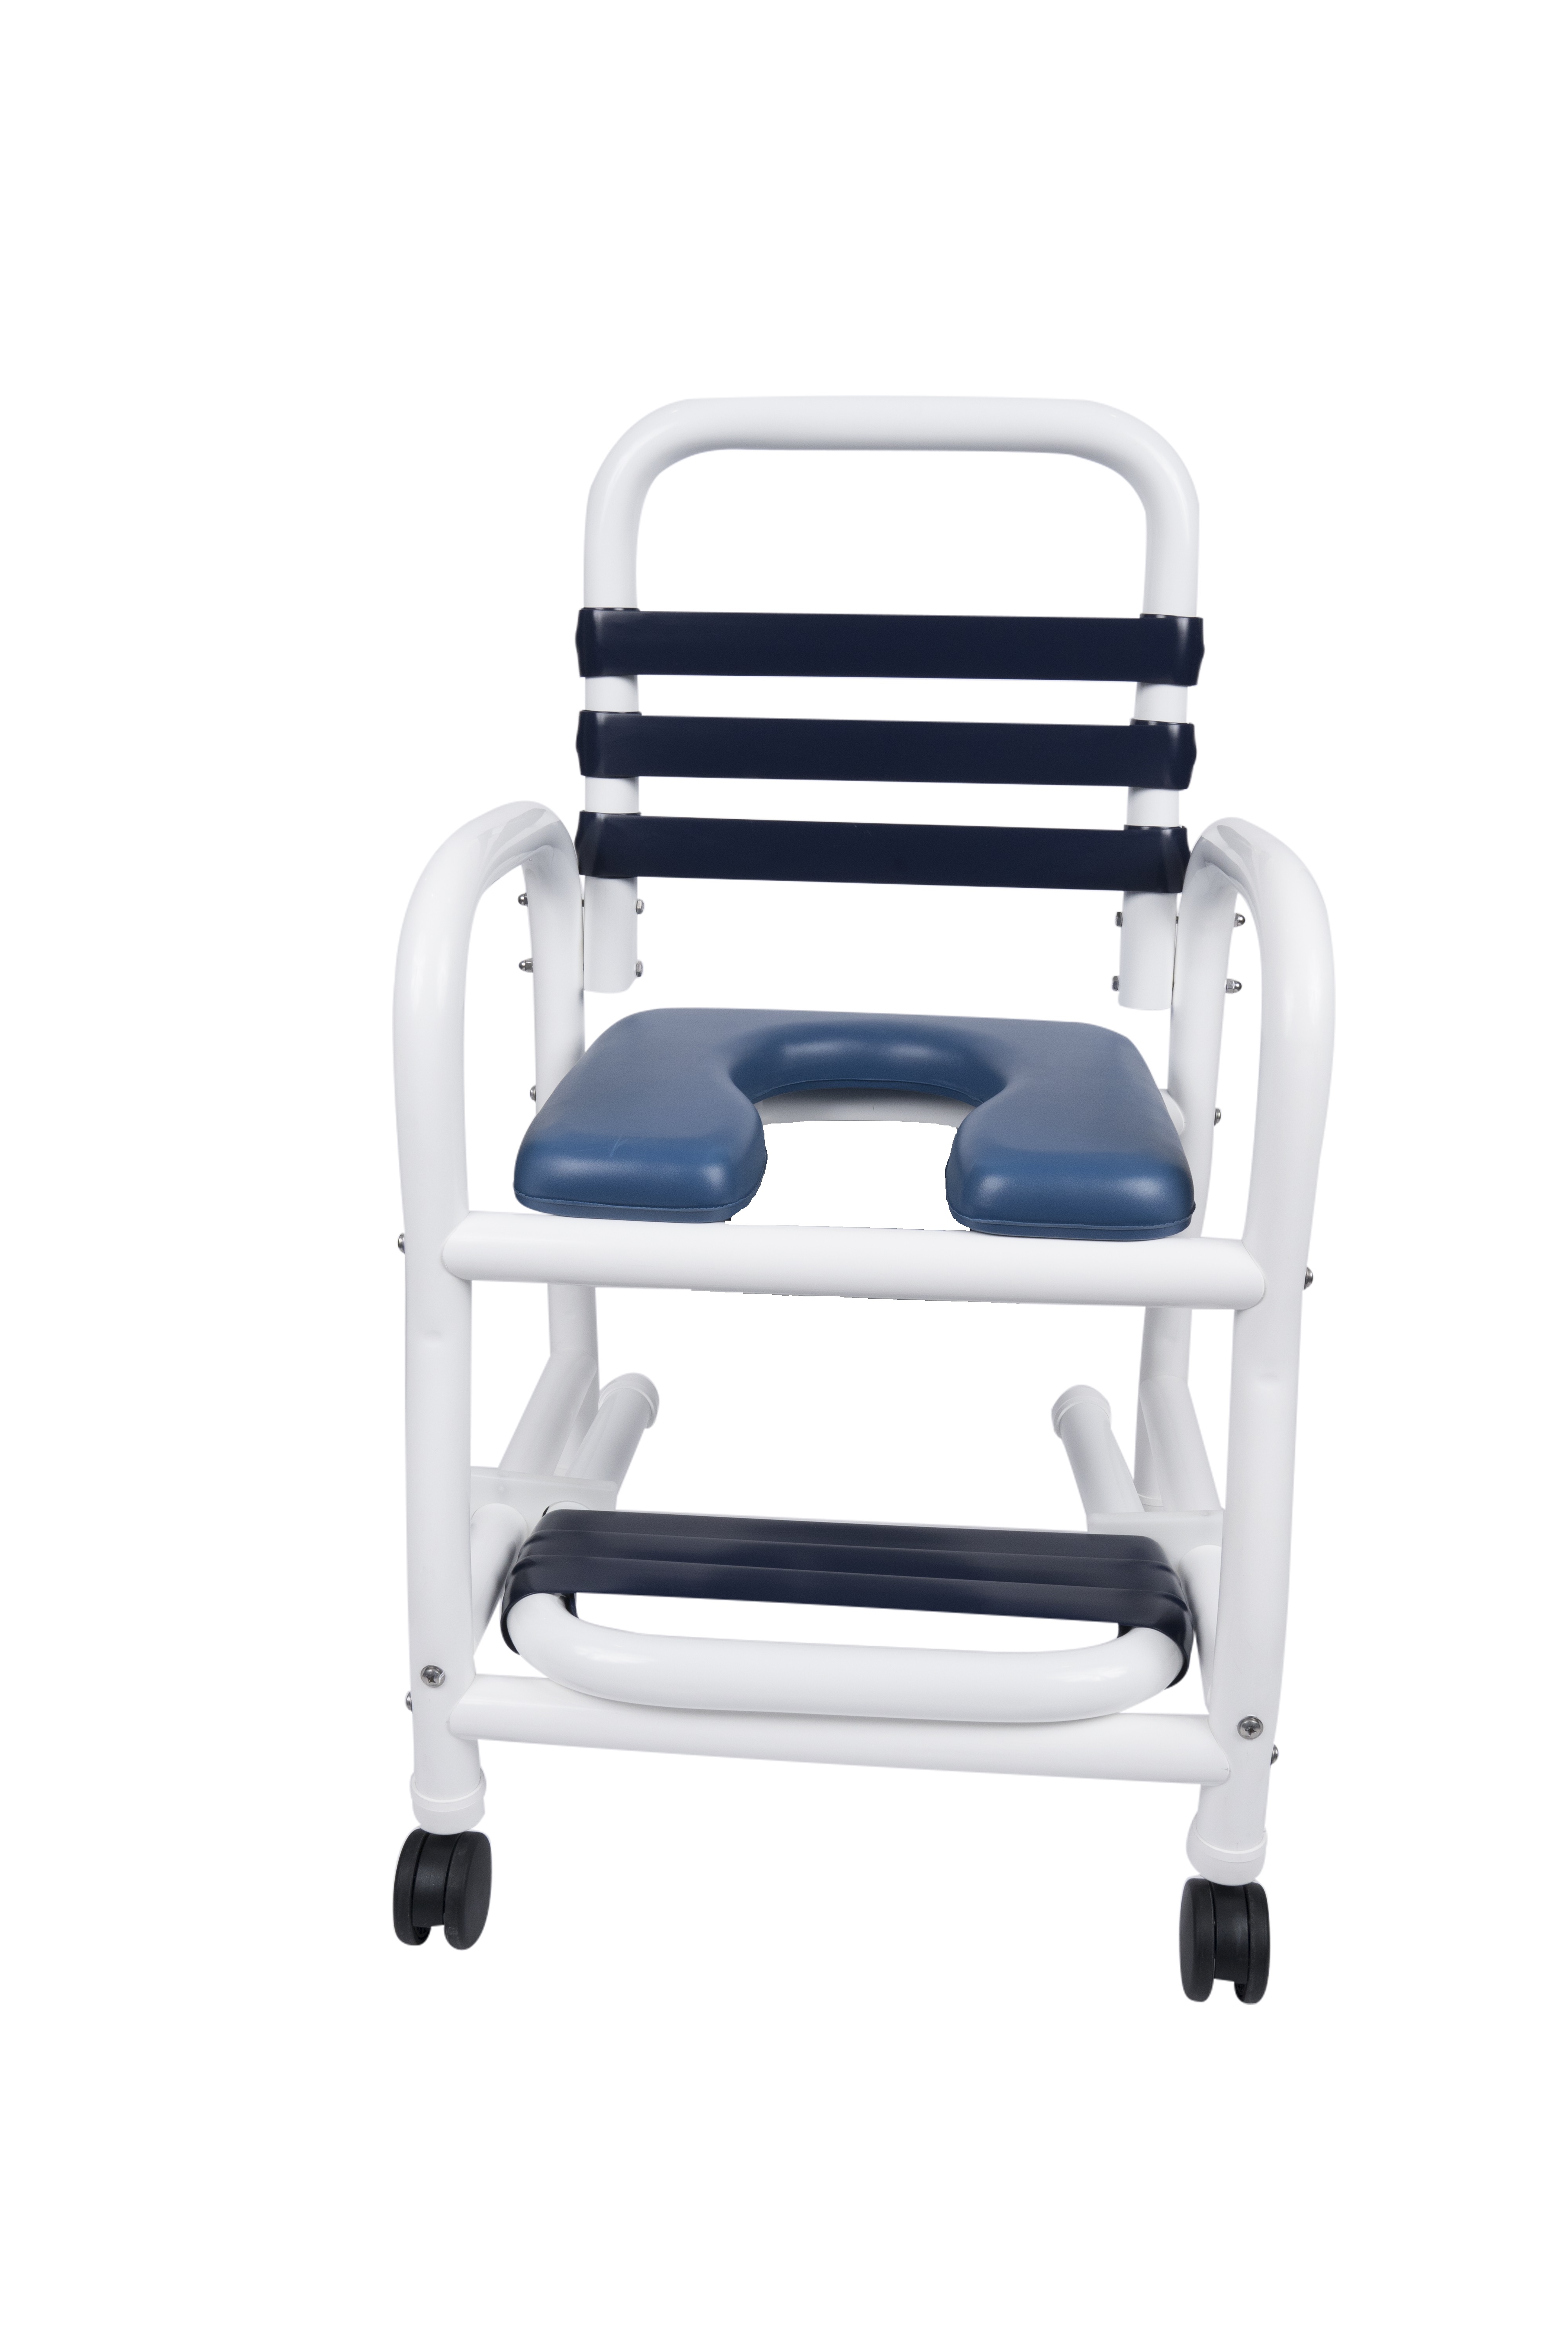 Picture of Infection Control Design DNE-118-3TWL-SF 18 in. Deluxe New Era Infection Control Shower Commode Chair, 3 in. Twin Size - 18 x 38.5 x 20.5 in.